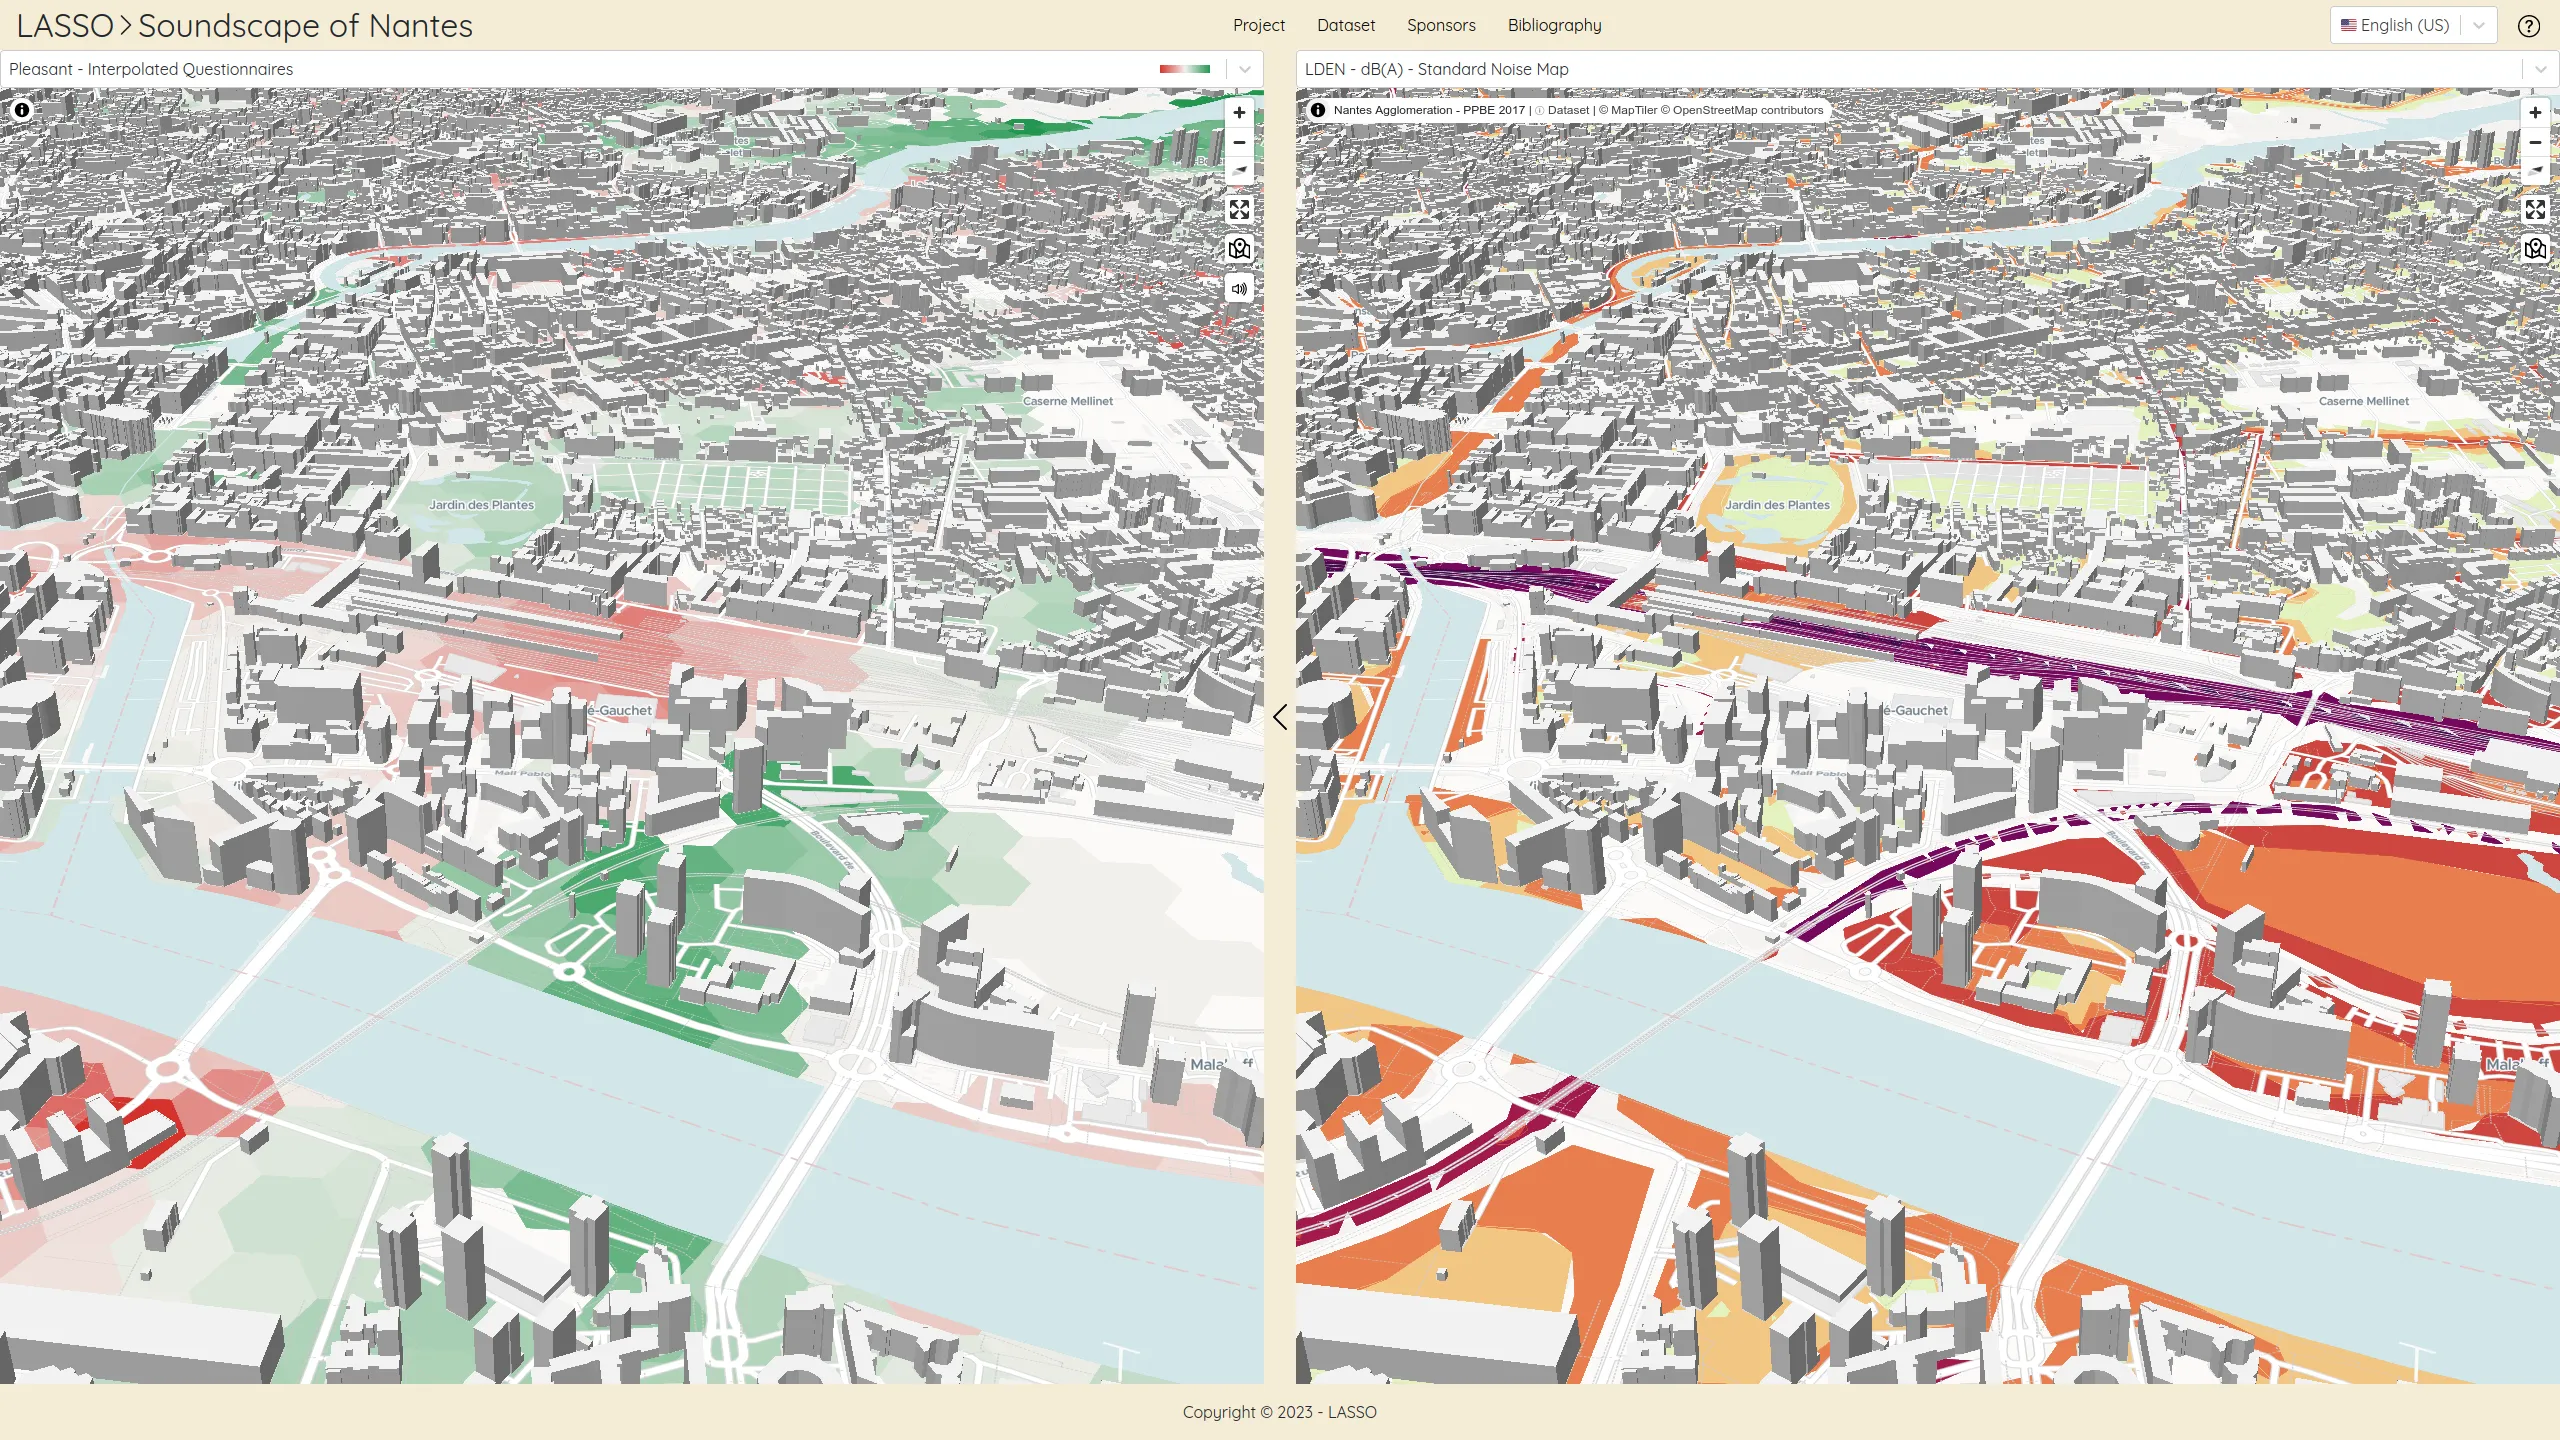 Two maps are synchronised to ease to compare variables: 'pleasant' on the left, standard noise levels on the right.